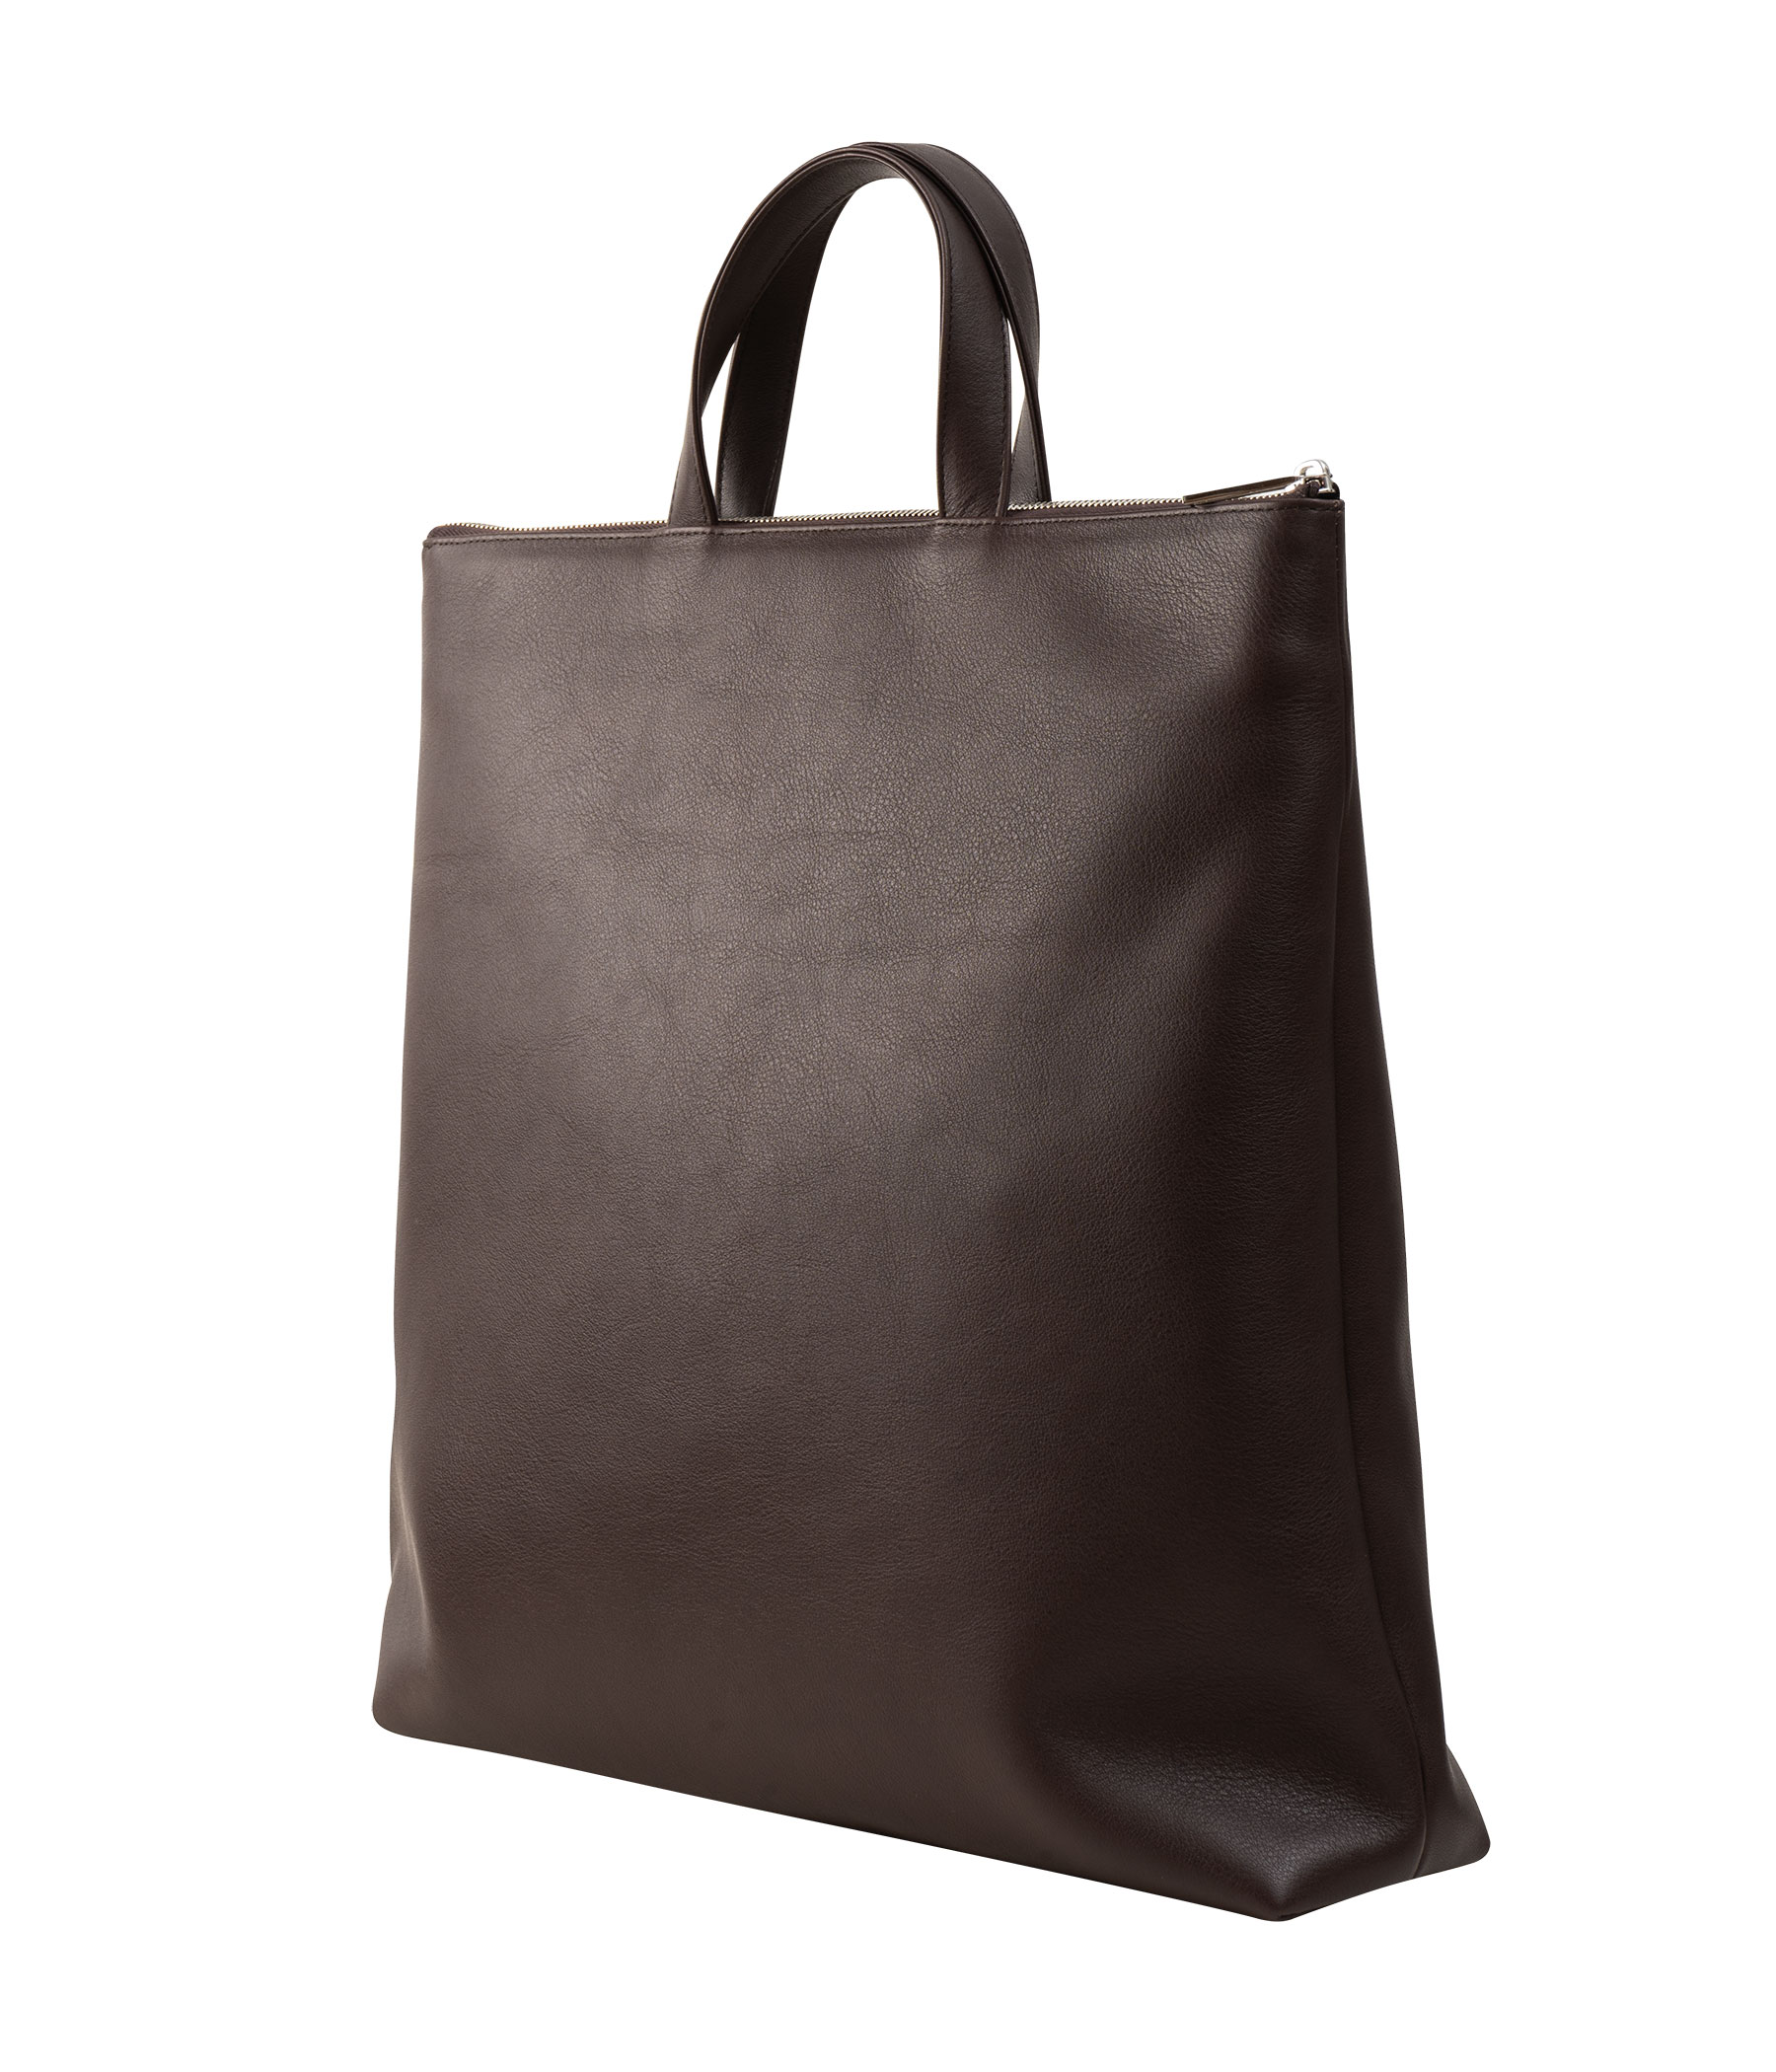 LUCIDO LEATHER ACCORDION TOTE BAG